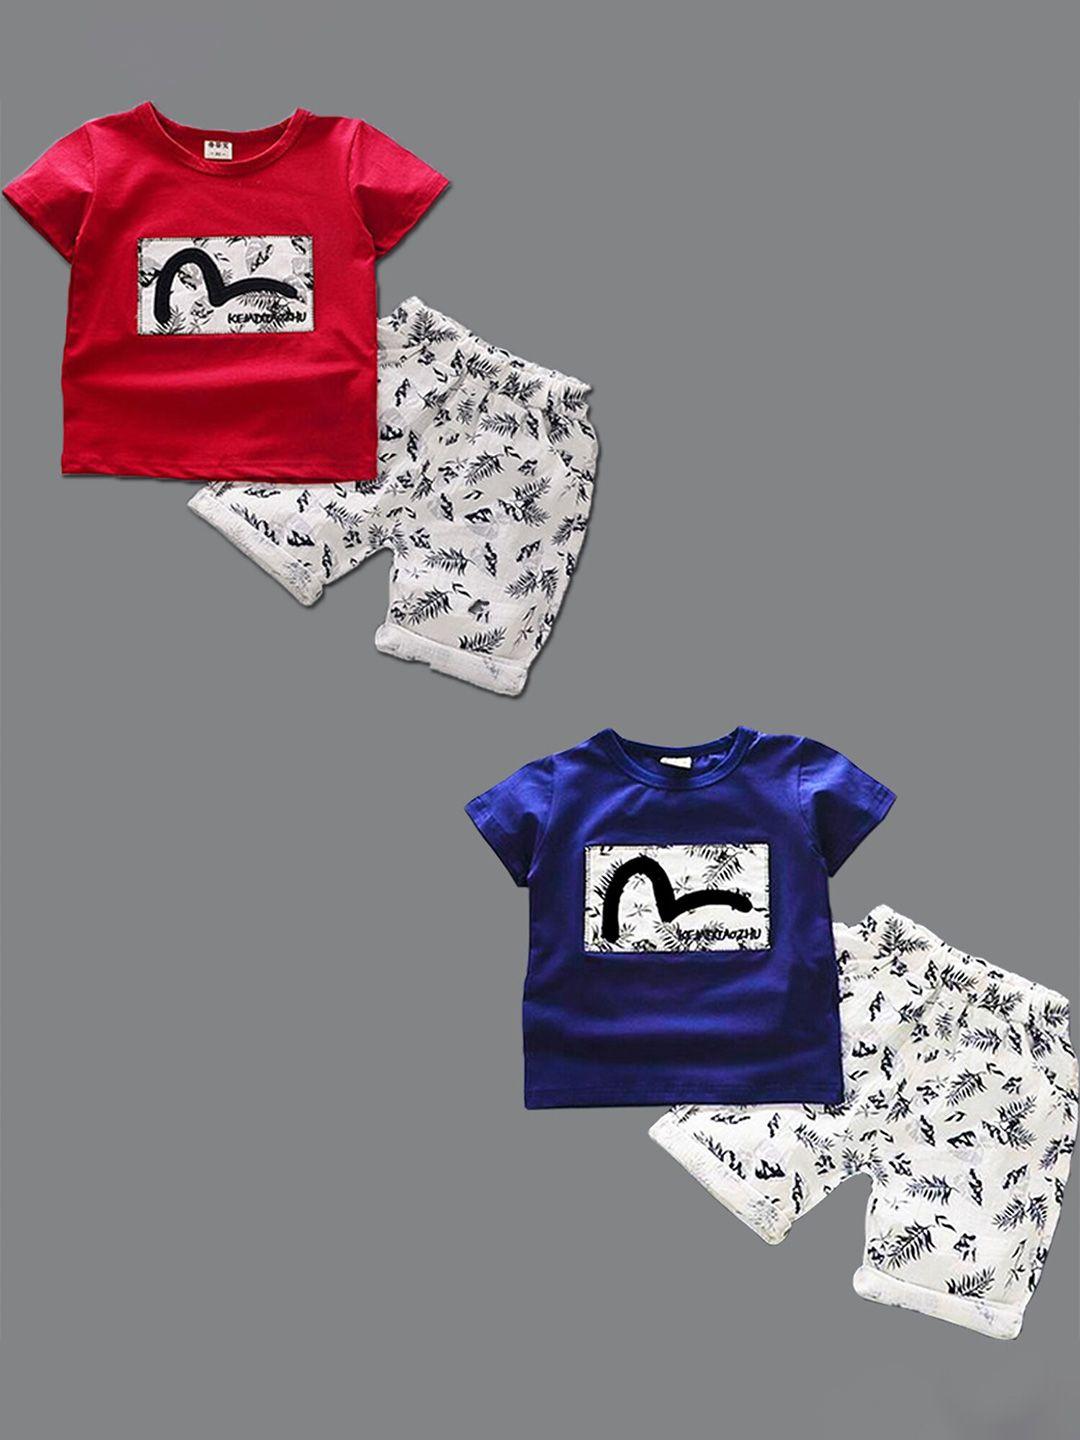 baesd-unisex-kids-multicoloured-printed-t-shirt-with-shorts